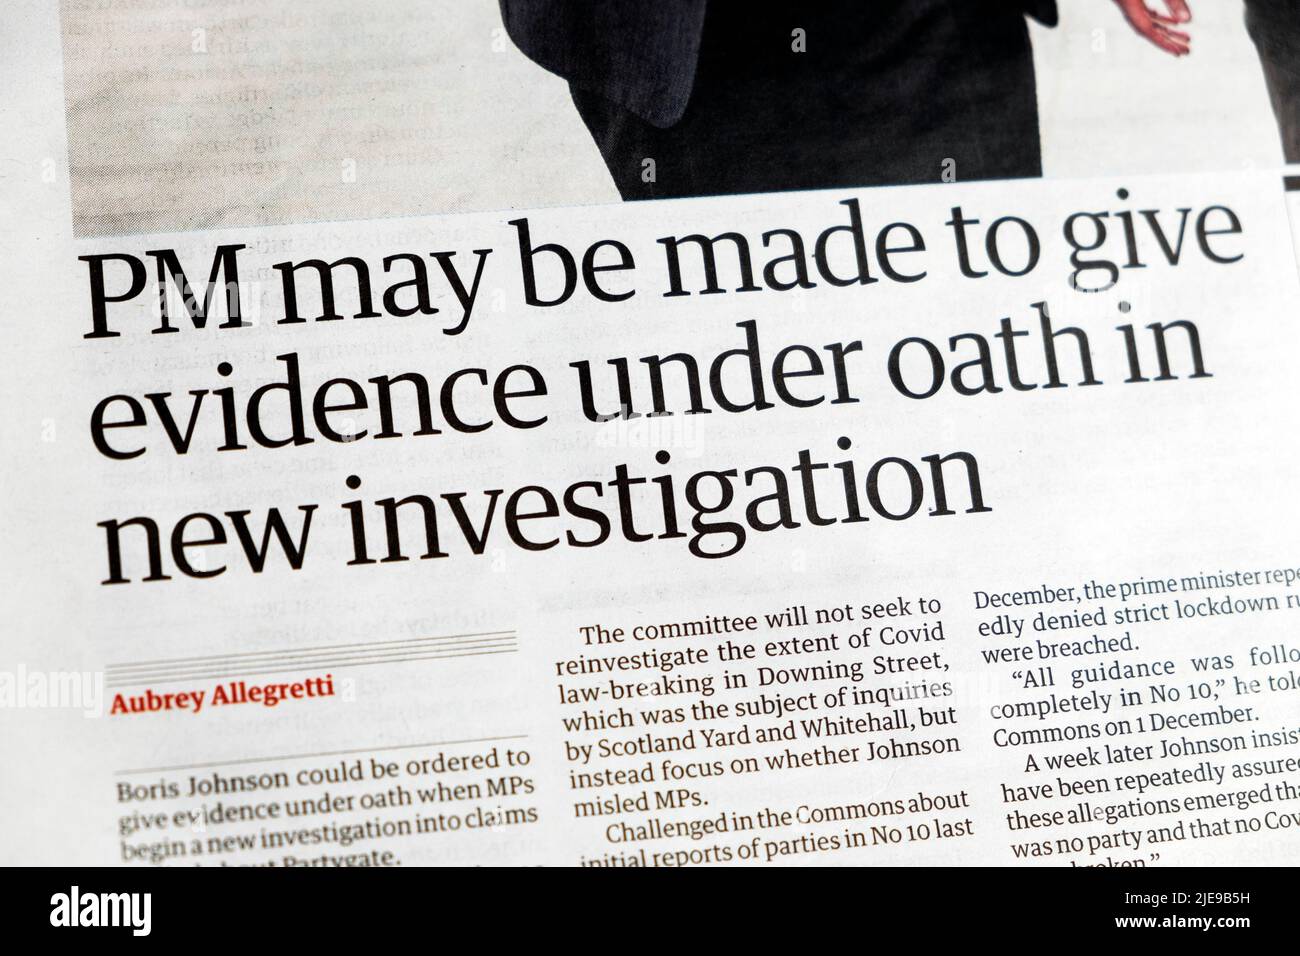 Boris Johnson 'PM may be made to give evidence under oath in new investigation' Guardian newspaper headline Partygate article 17 June 2022 London UK Stock Photo